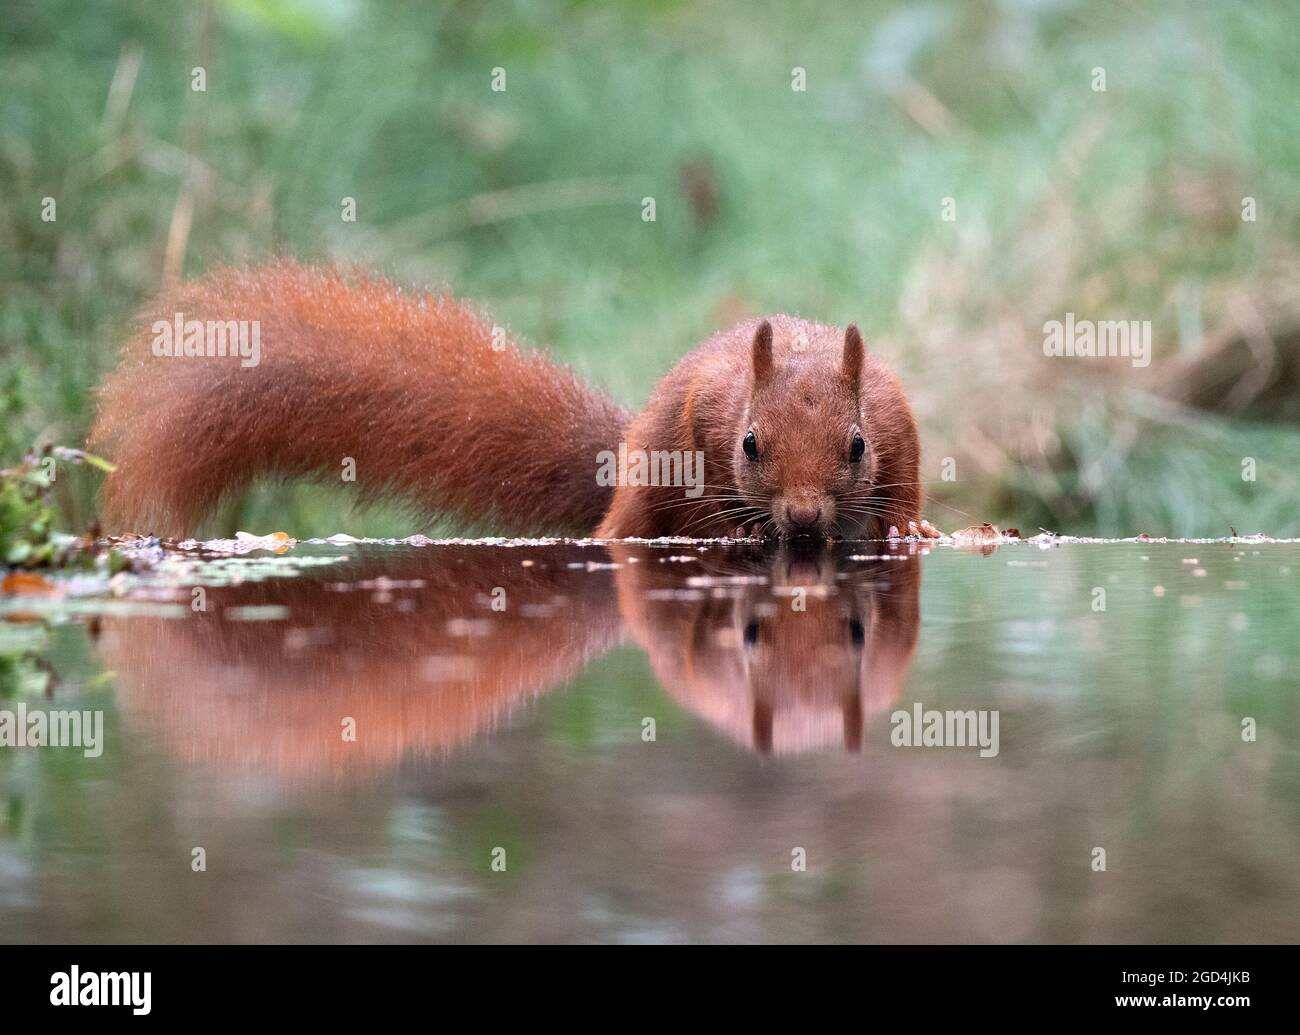 Red squirrel (Sciurus vulgaris) drinking at a pool in the forest Stock Photo